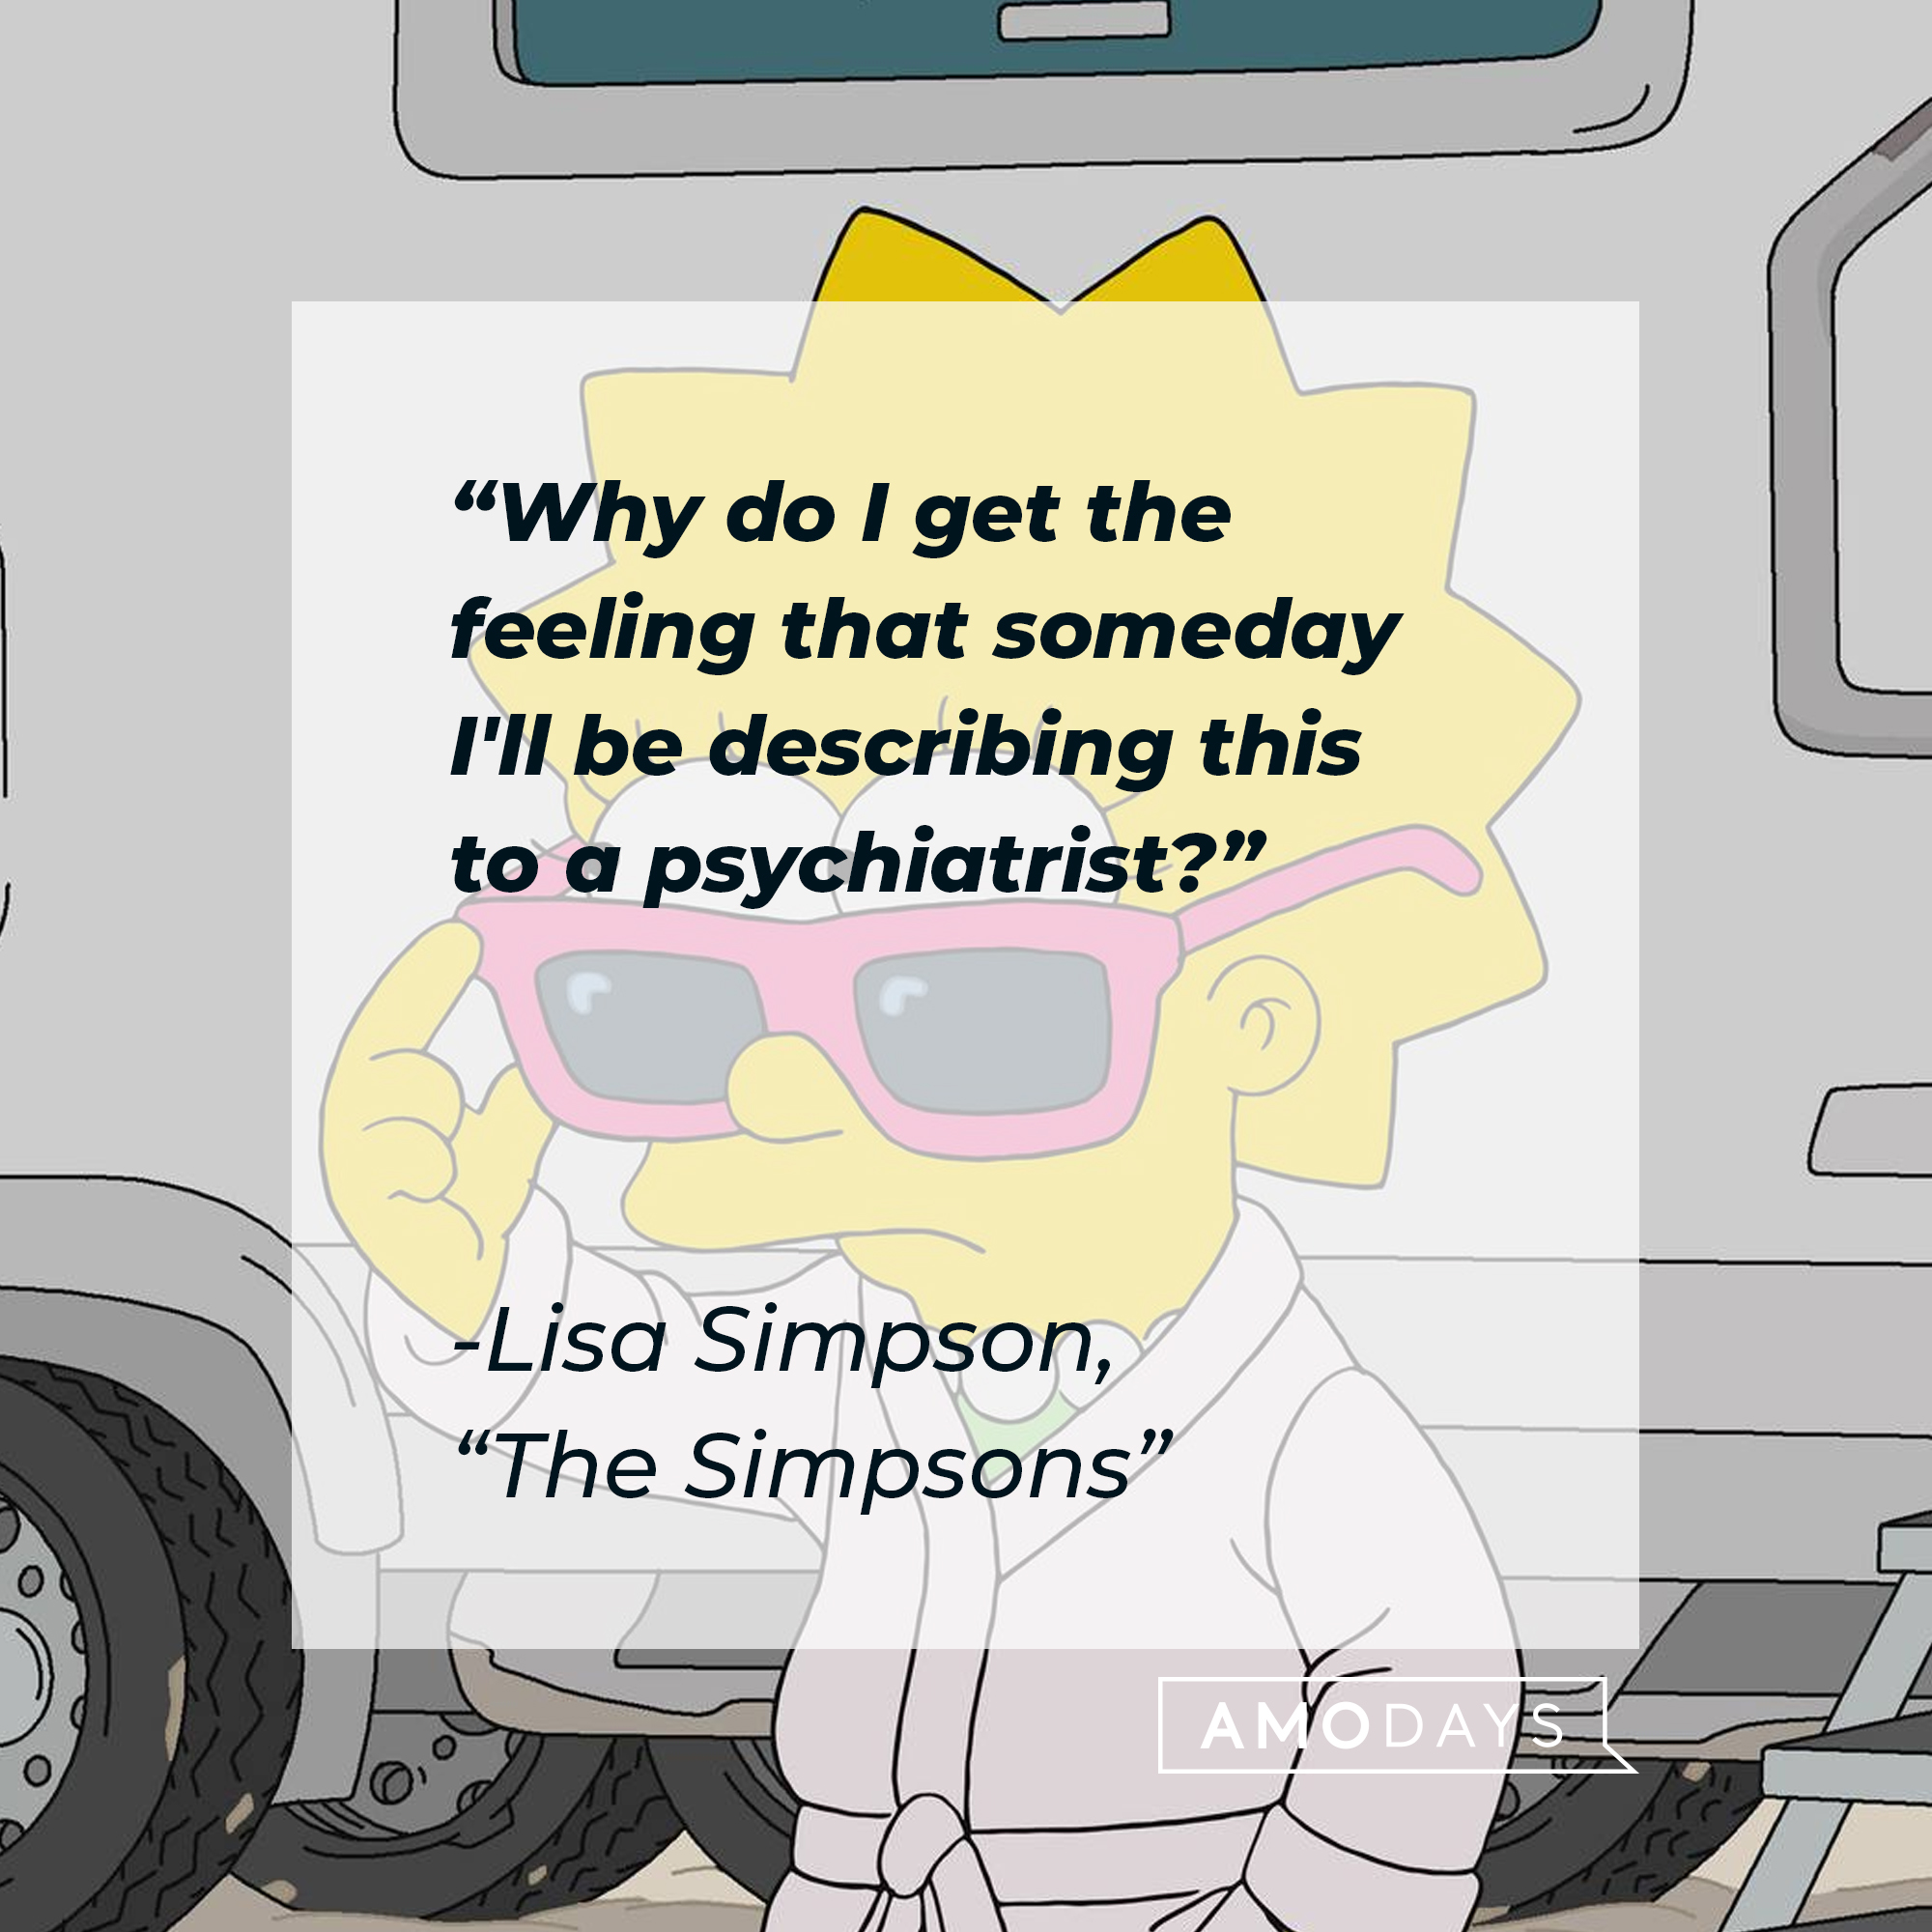 Lisa Simpson with her quote: "Why do I get the feeling that someday I'll be describing this to a psychiatrist?” | Source: Facebook.com/TheSimpsons